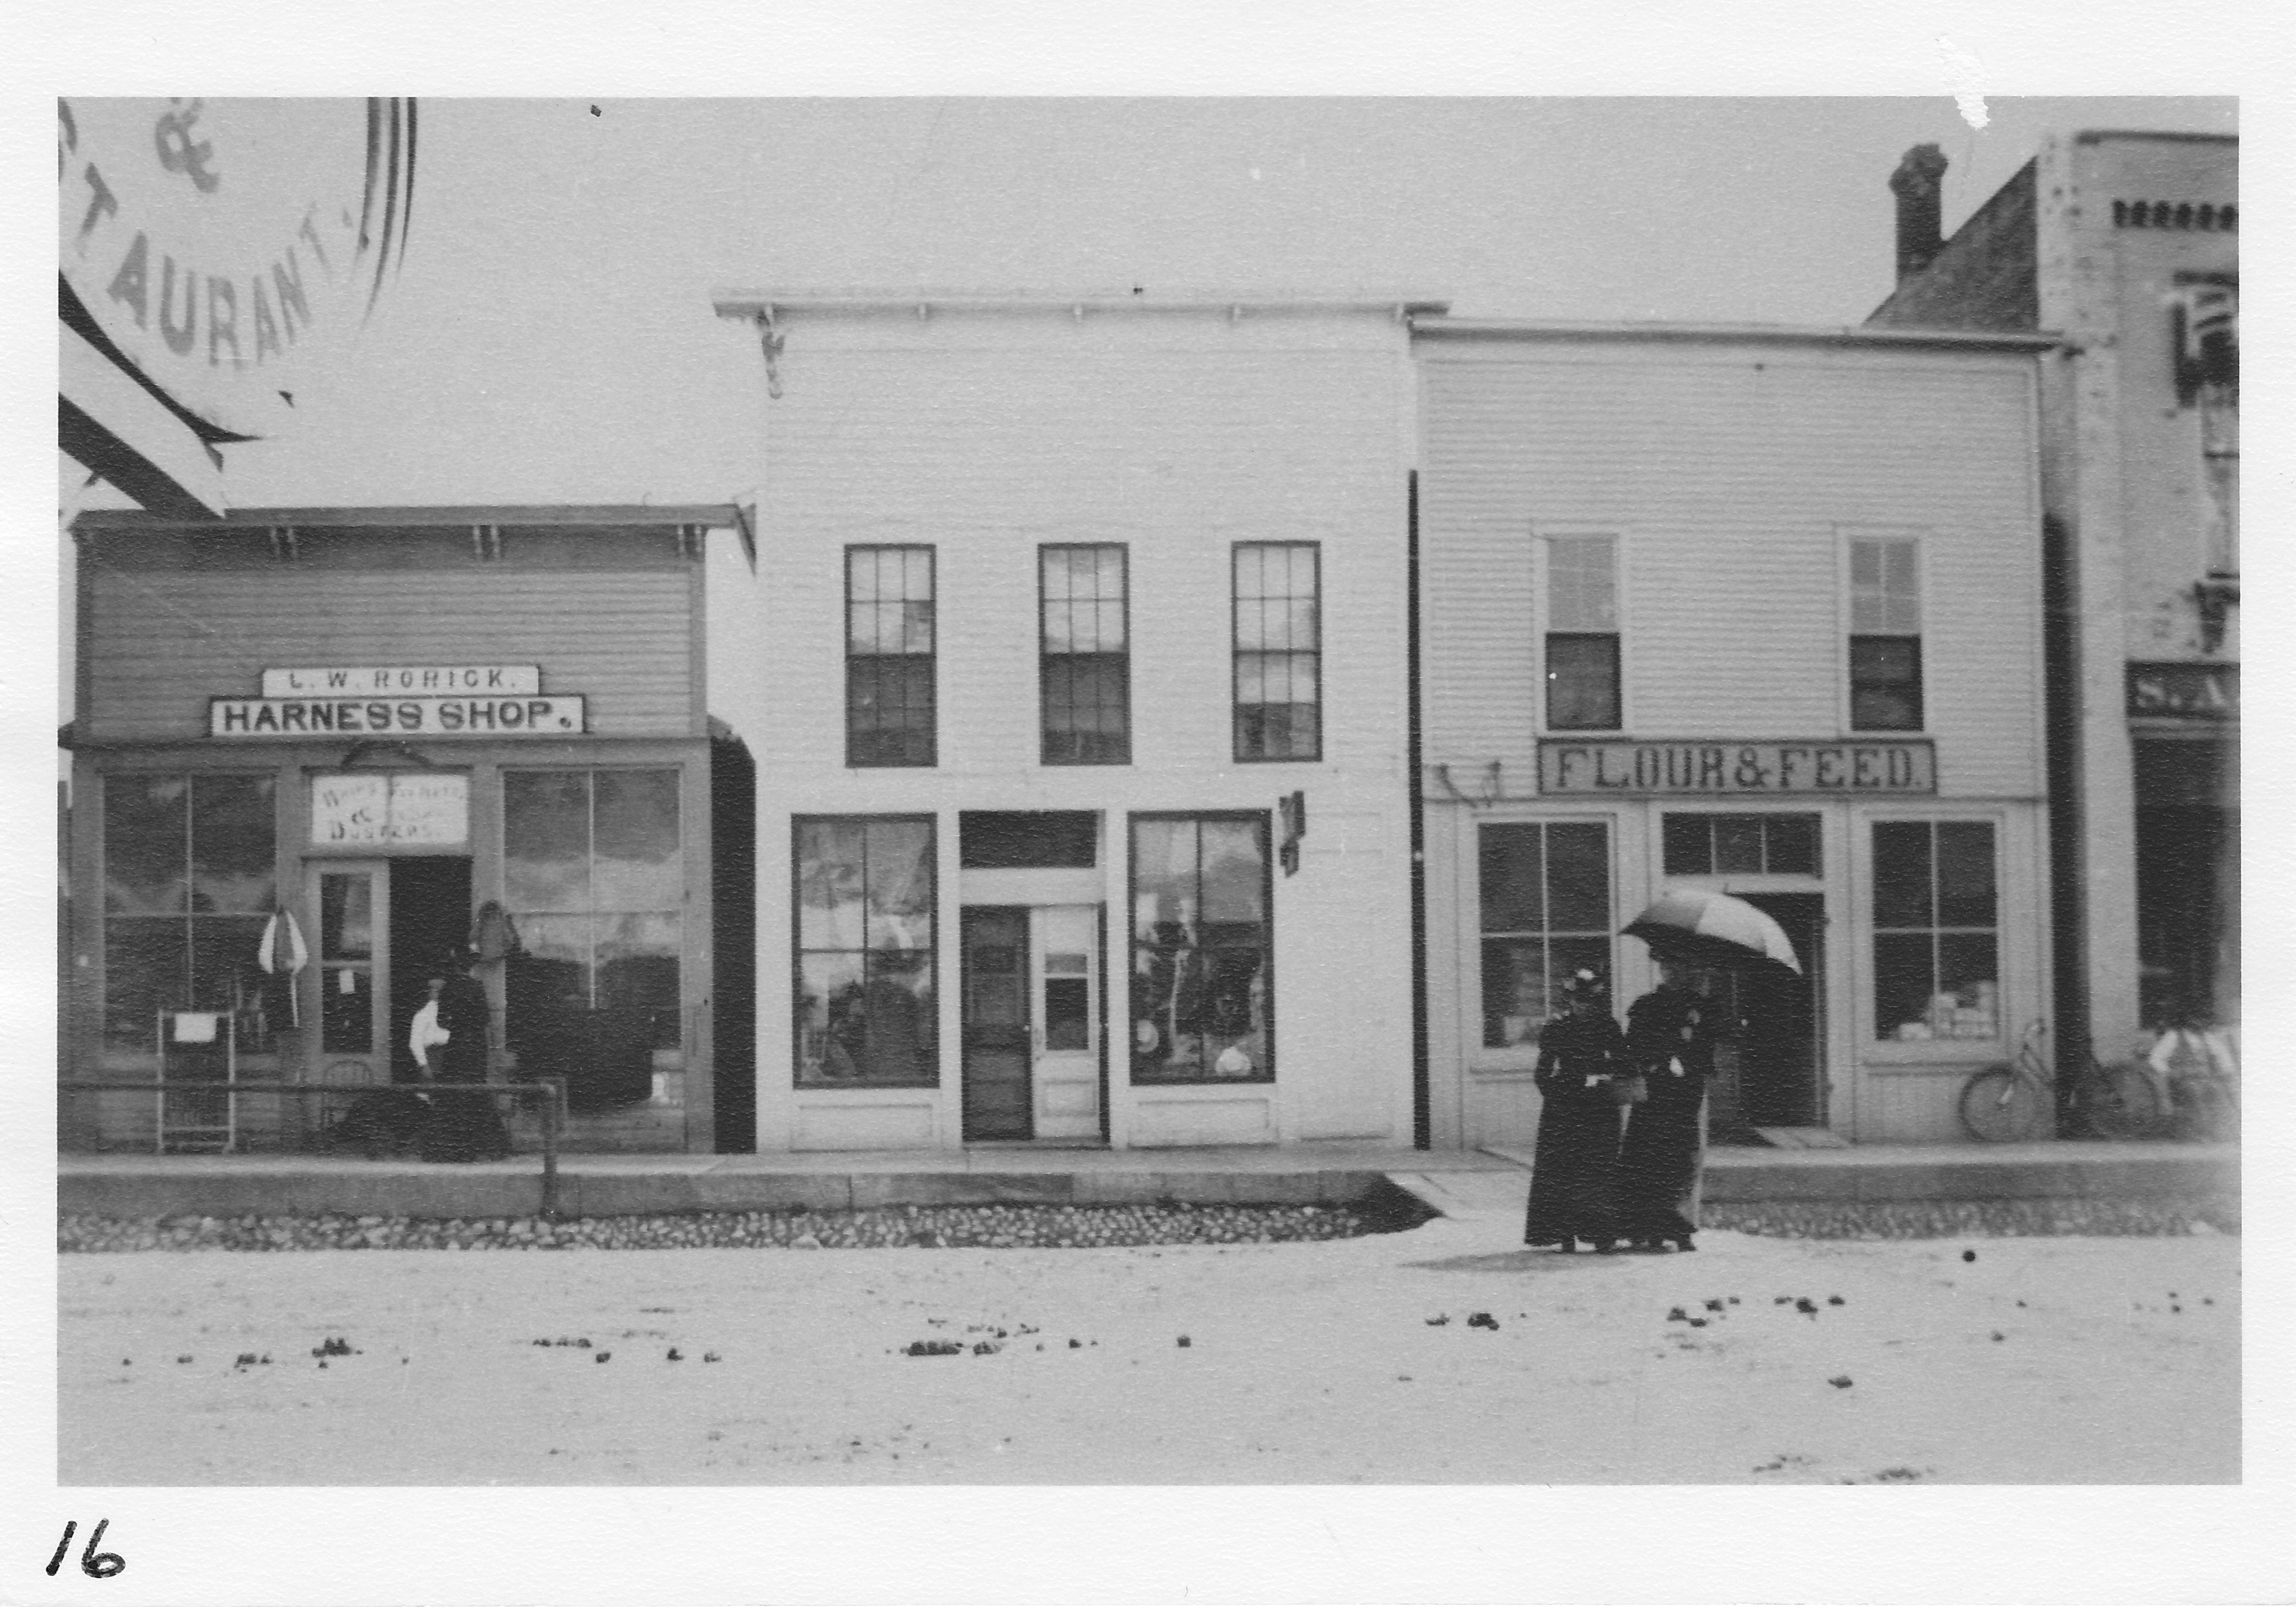 West Main Street, south side.  Mrs. Ellen Oldfield and her sister crossing the street.  Other buildings:  Lewis R. Rorick Harness Shop; Killin Hat Shop; Flour and Feed Shop (later Brasher dentist office & Rex Theater ), Scofield’s Store, extreme right.